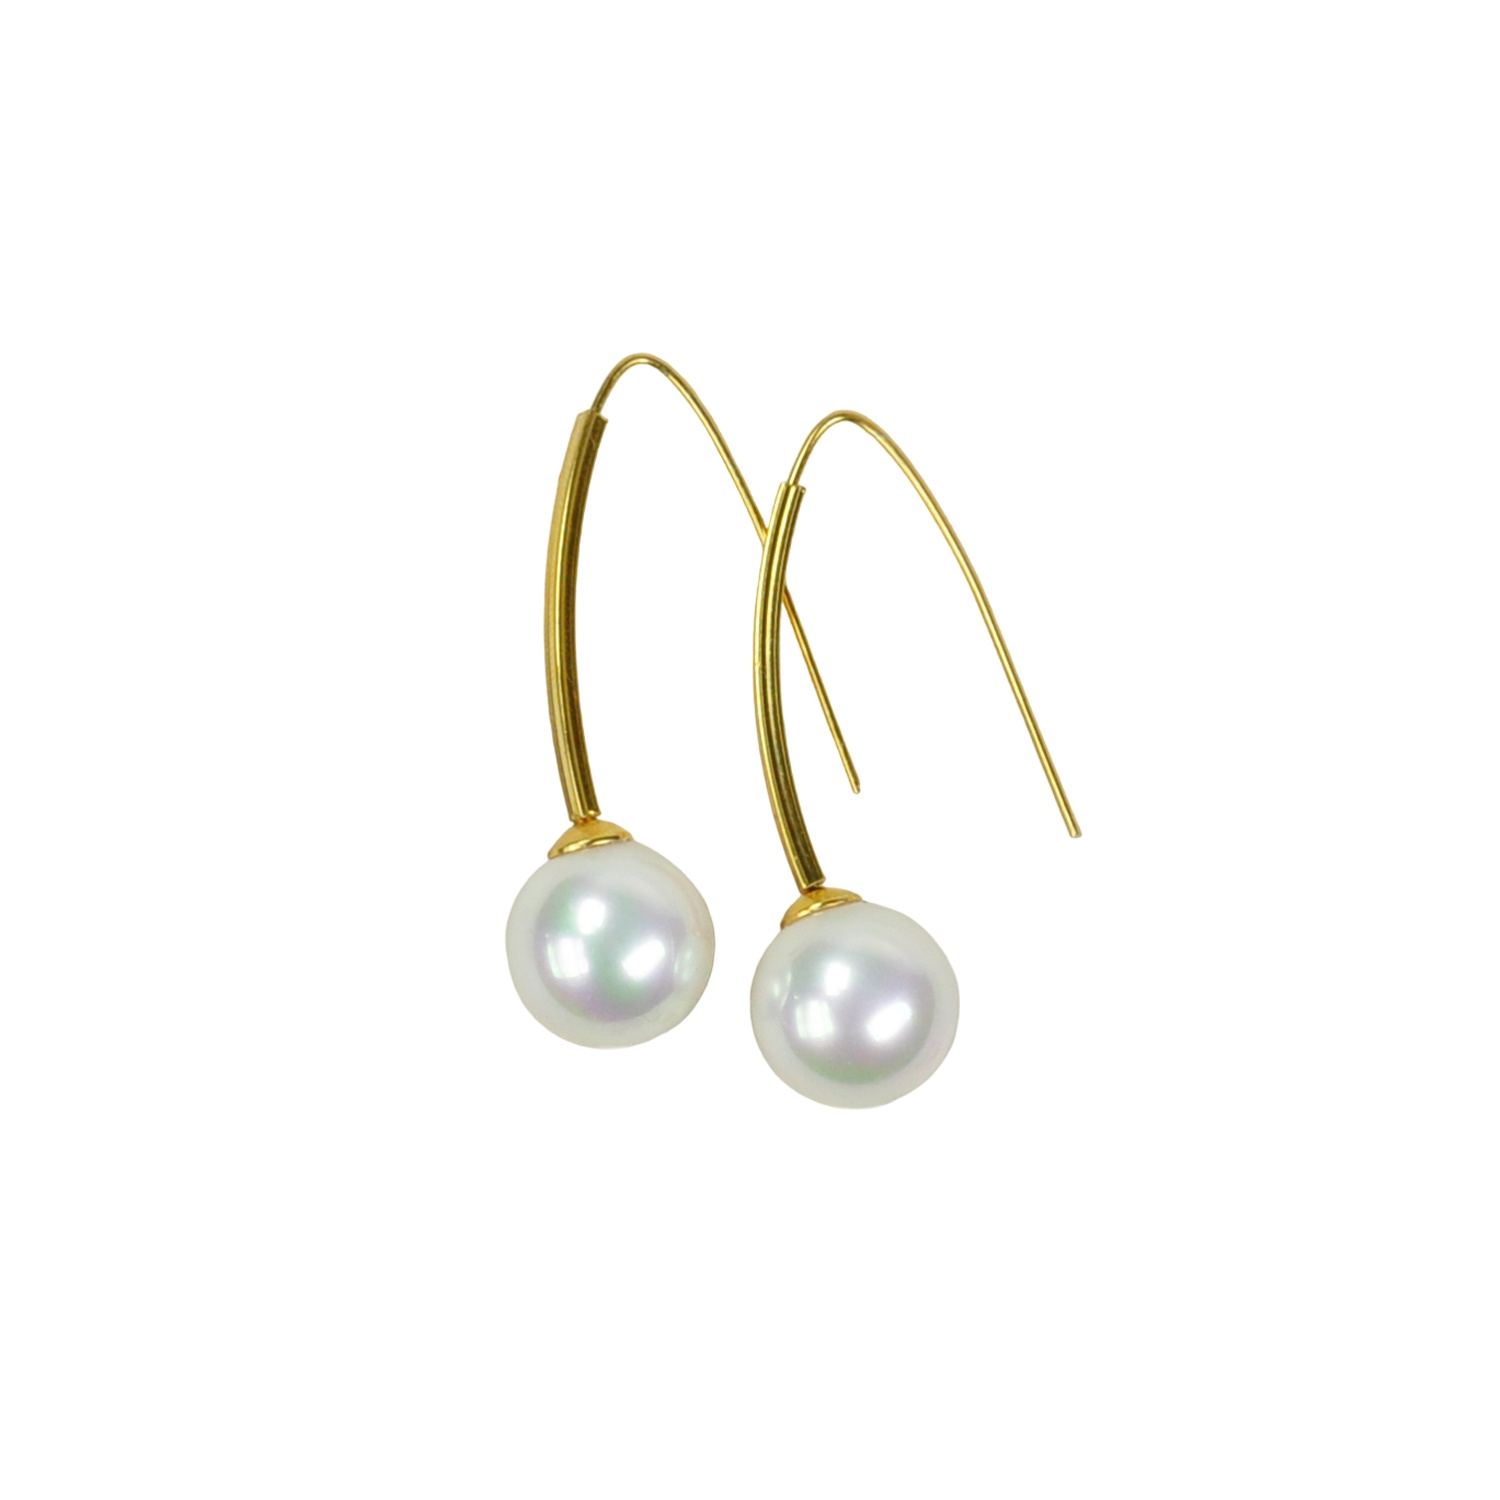 18 carat goldplated Sterling Silver Earrings with white Pearls